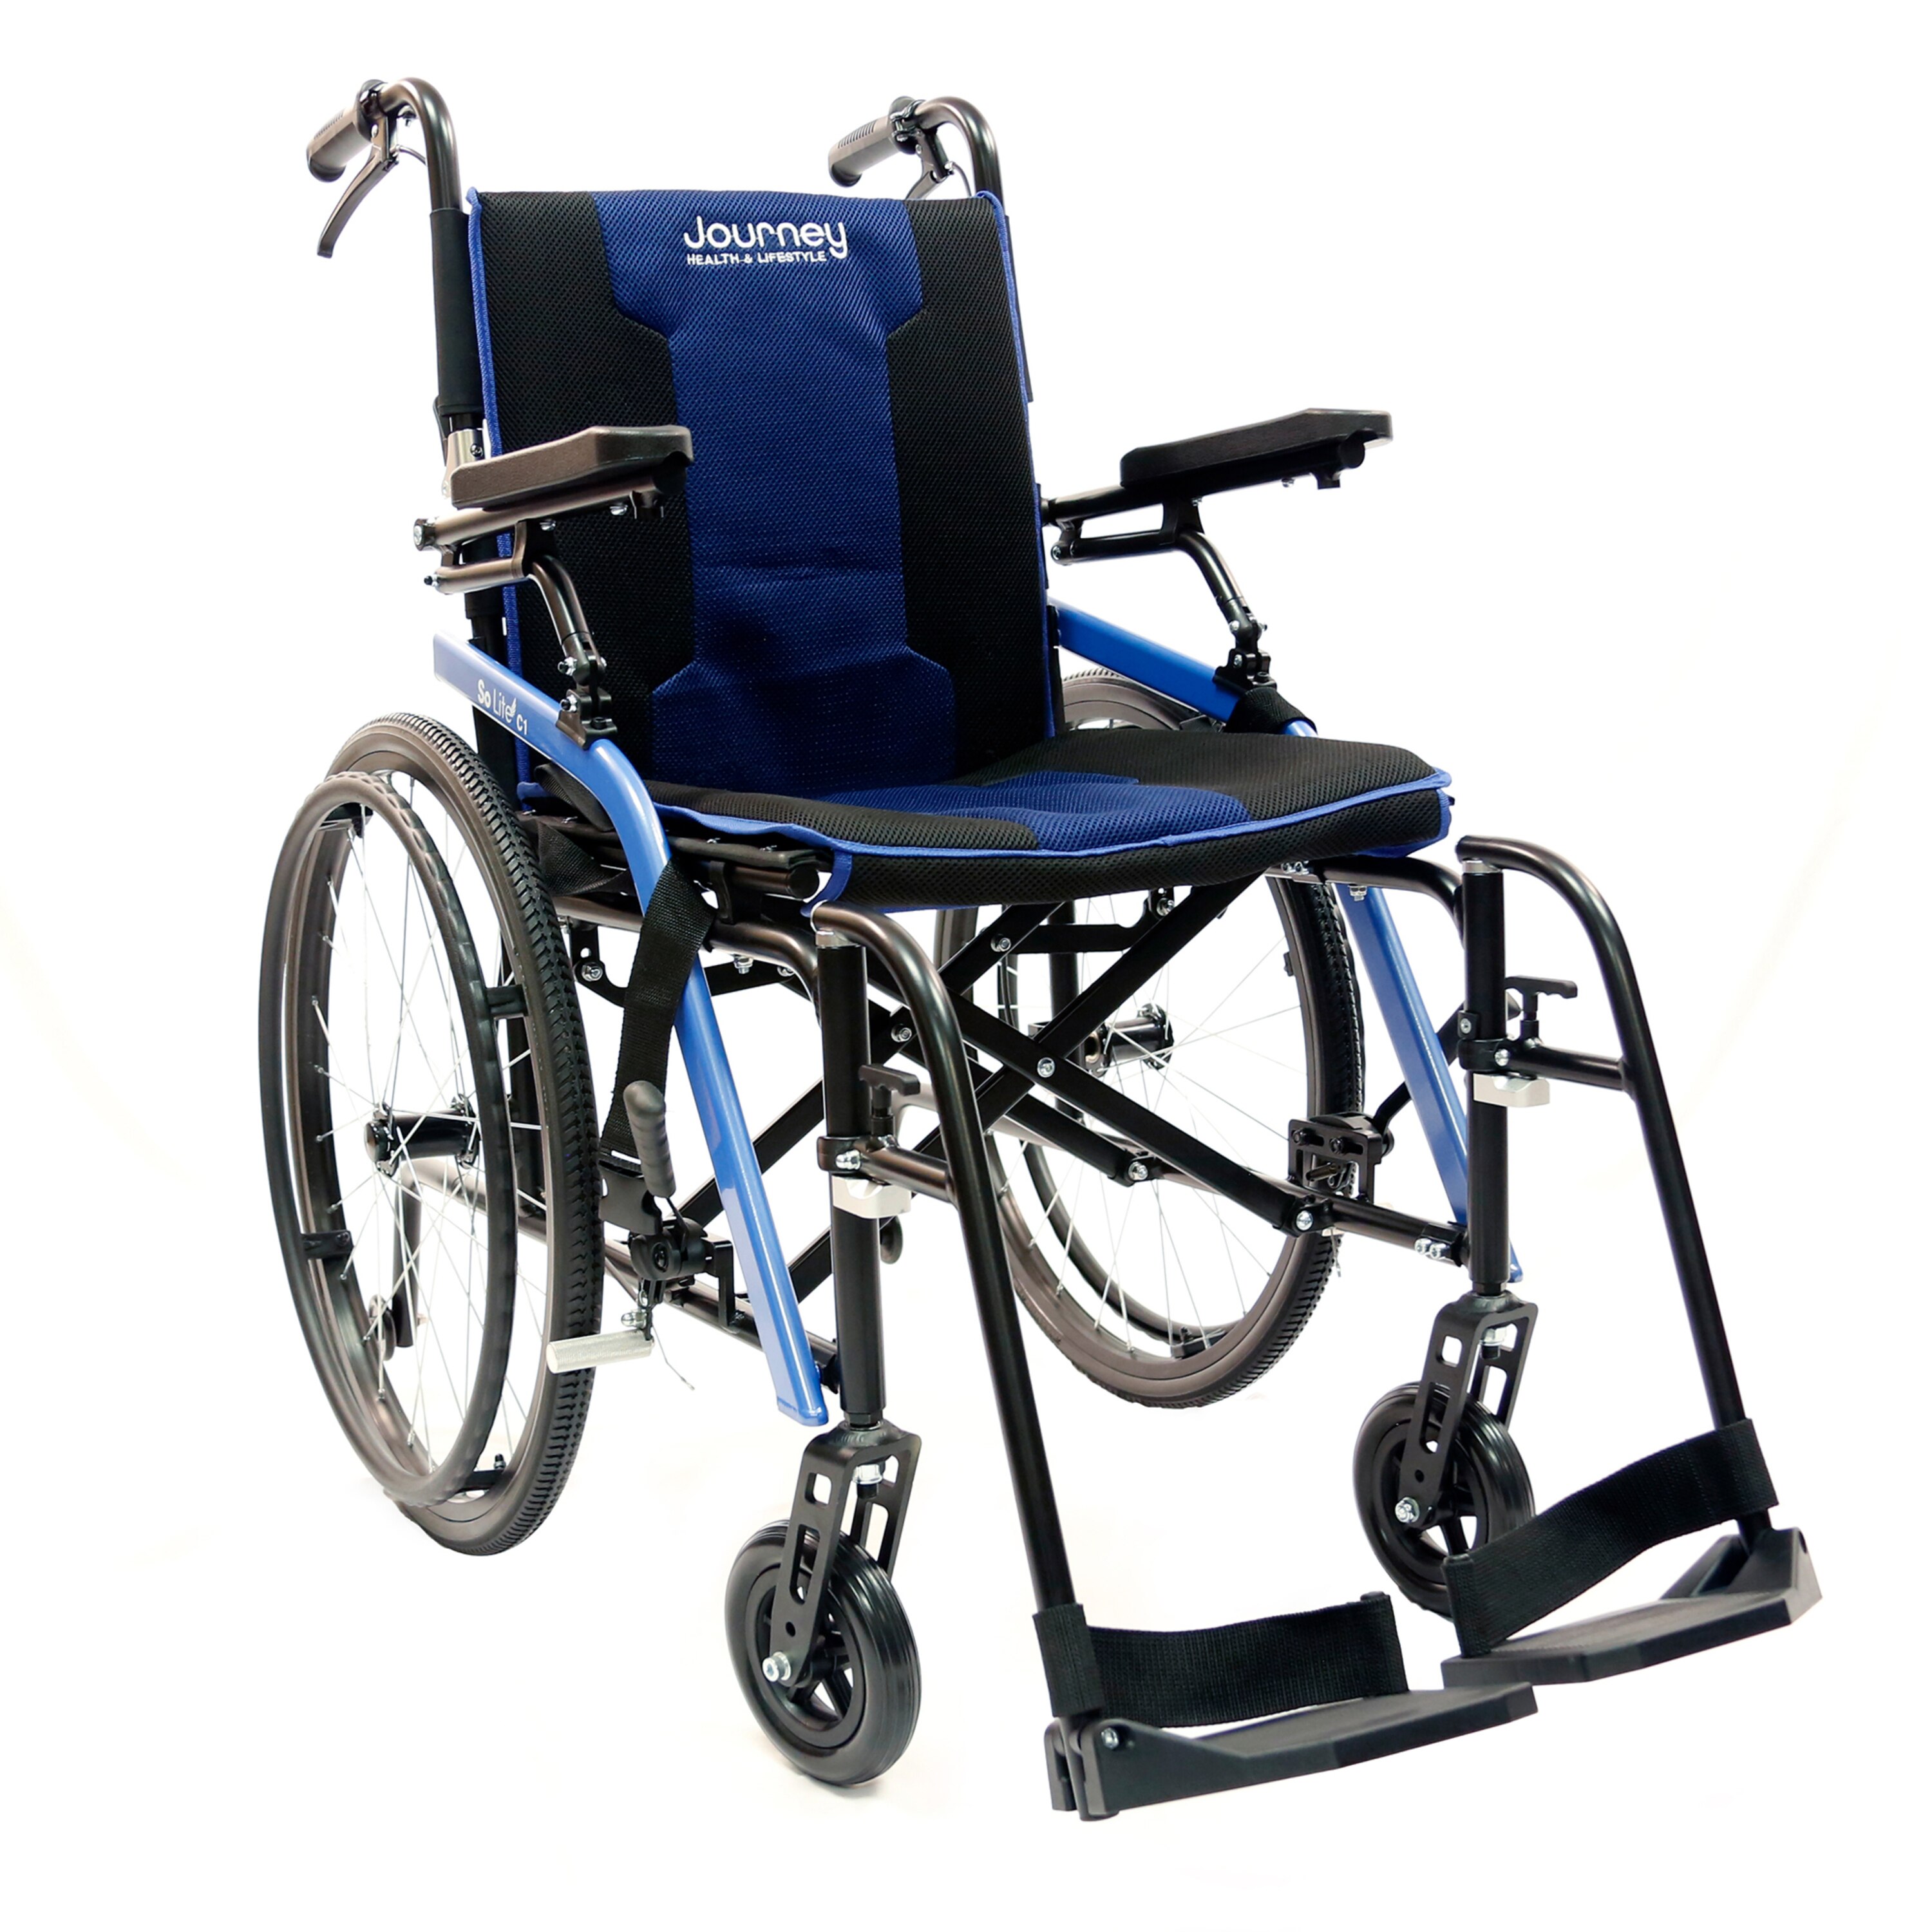 Journey Health And Lifestyle So Lite Folding Wheelchair With Padded Seat, Blue , CVS